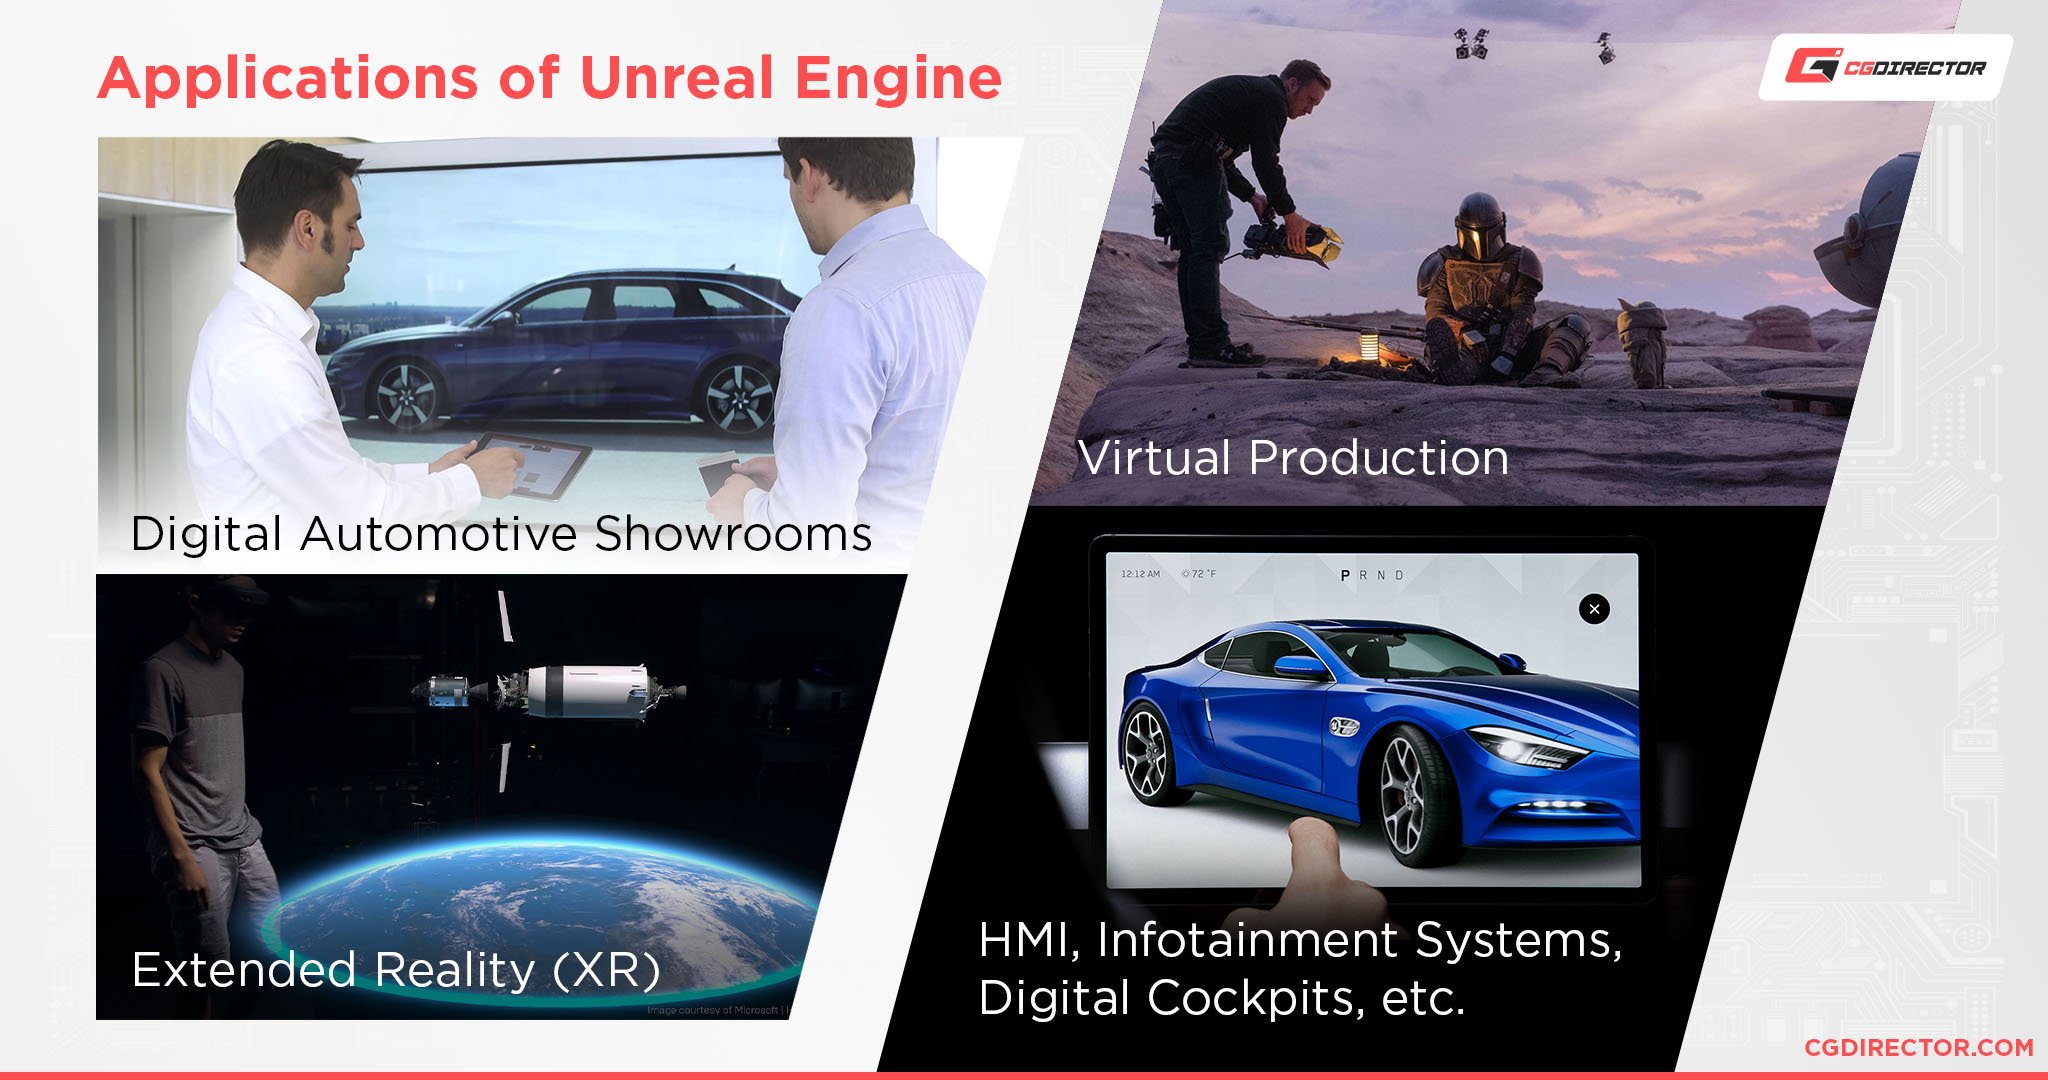 Applications of Unreal Engine